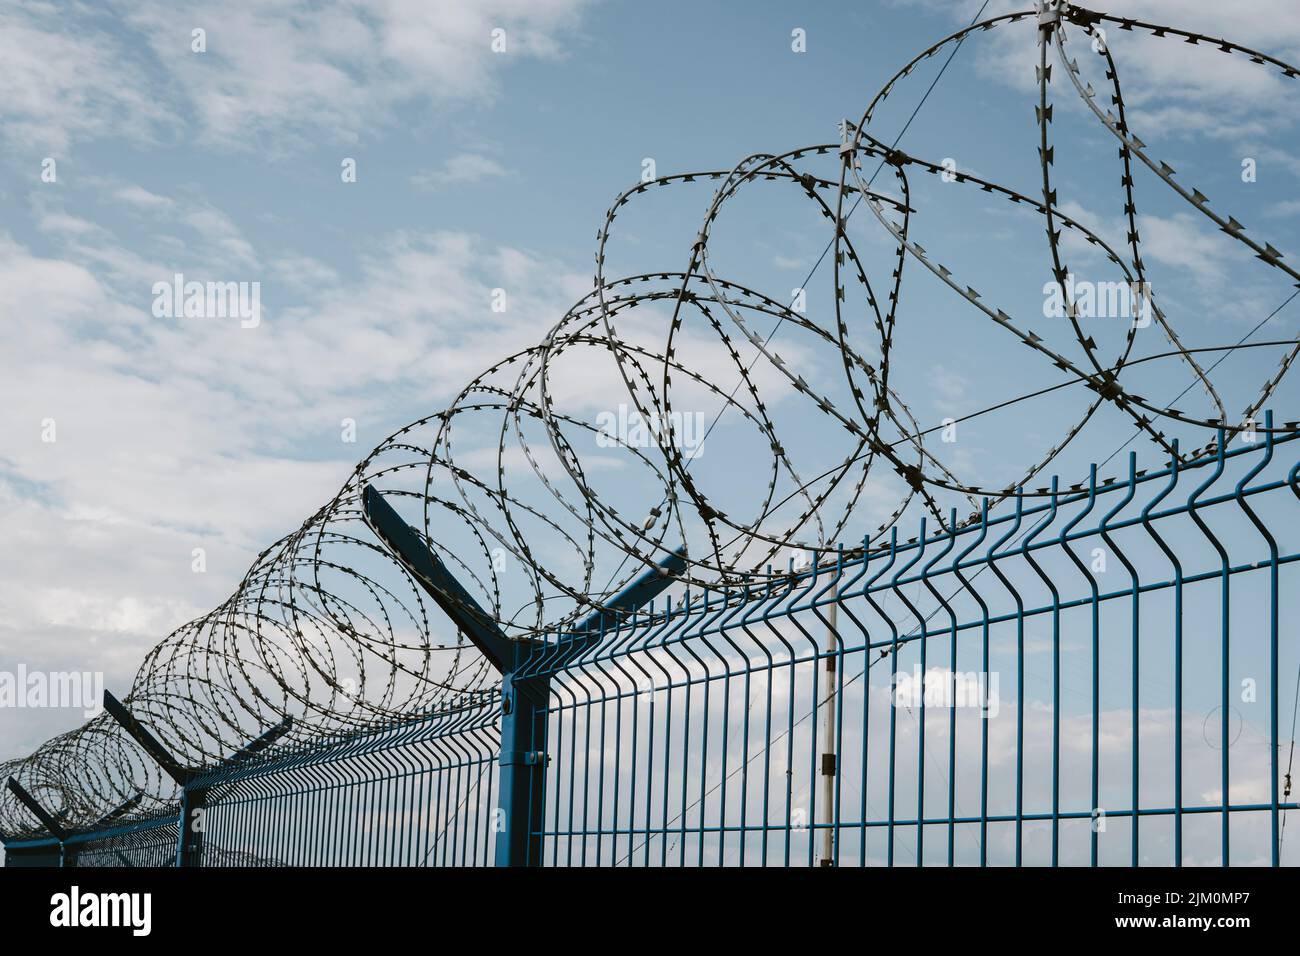 Coiled barbed wire fencing against a blue sky background Stock Photo